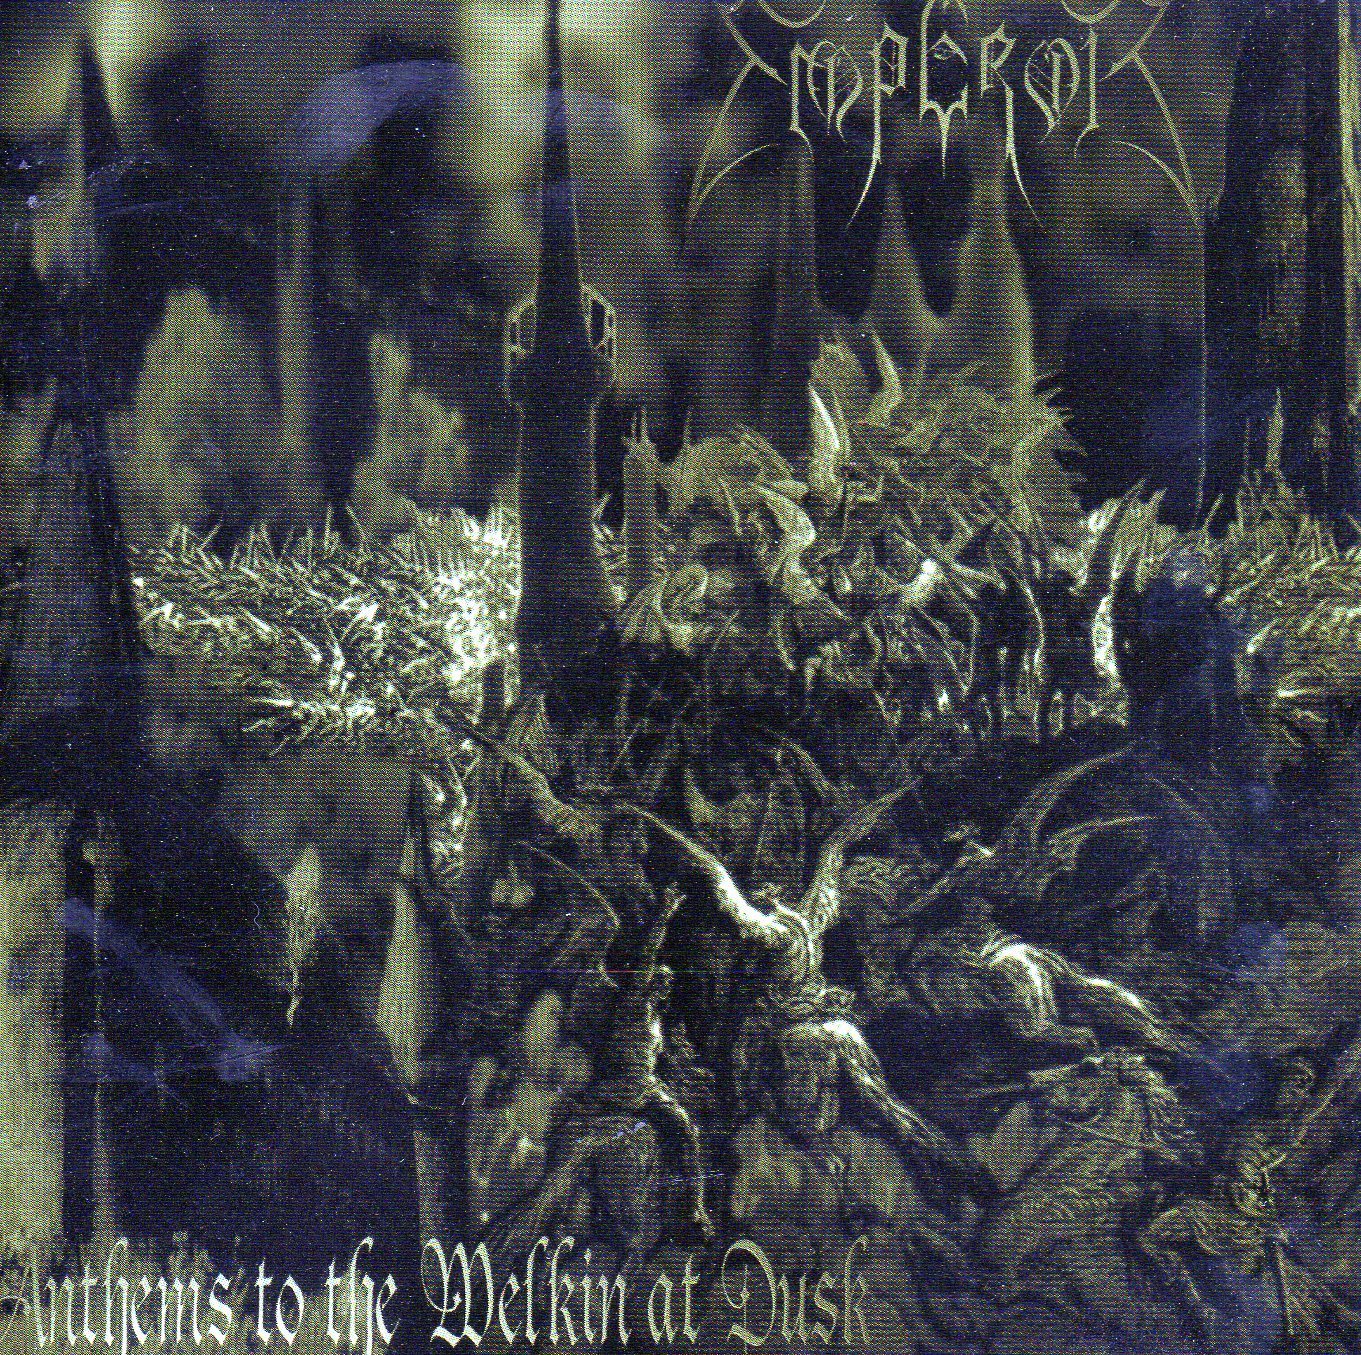 Emperor Anthems to the Welkin at Dusk. Voices of the Void могилы. Ариралы Voices of the Void. Voices of the Void kerfus.